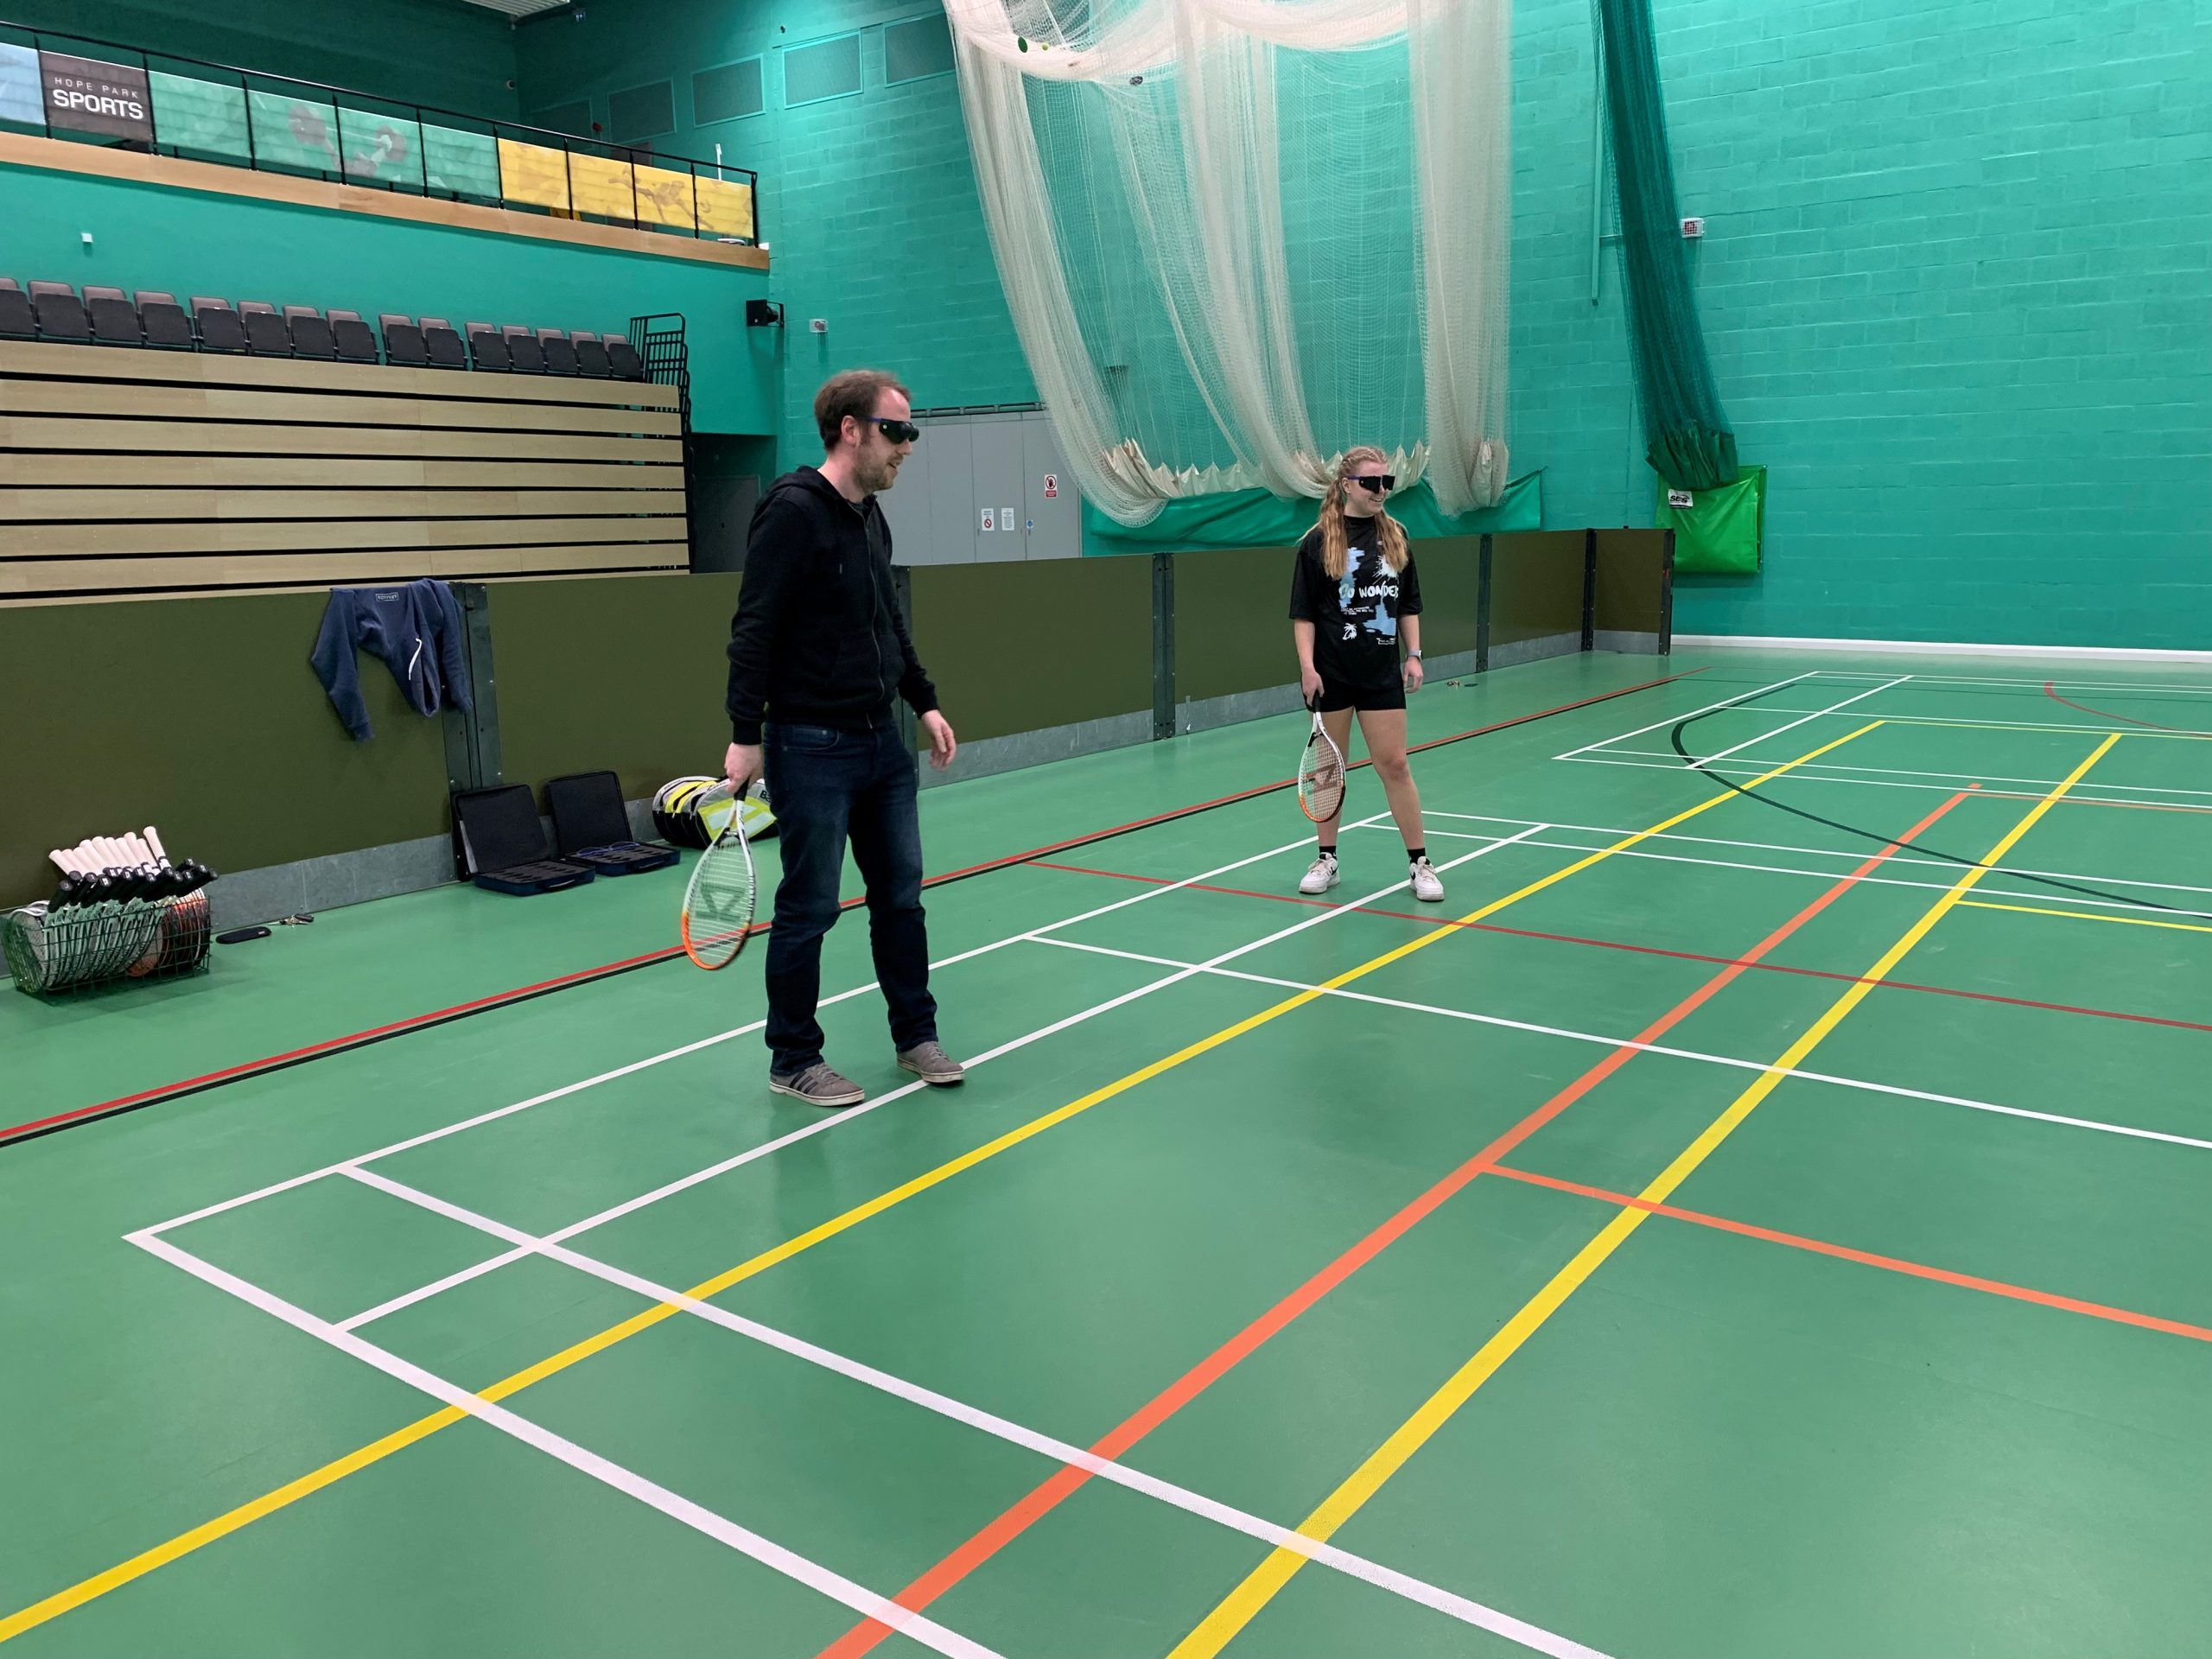 Image of two sports students on the indoor tennis court. Both are wearing sim specs and holding a tennis racket.